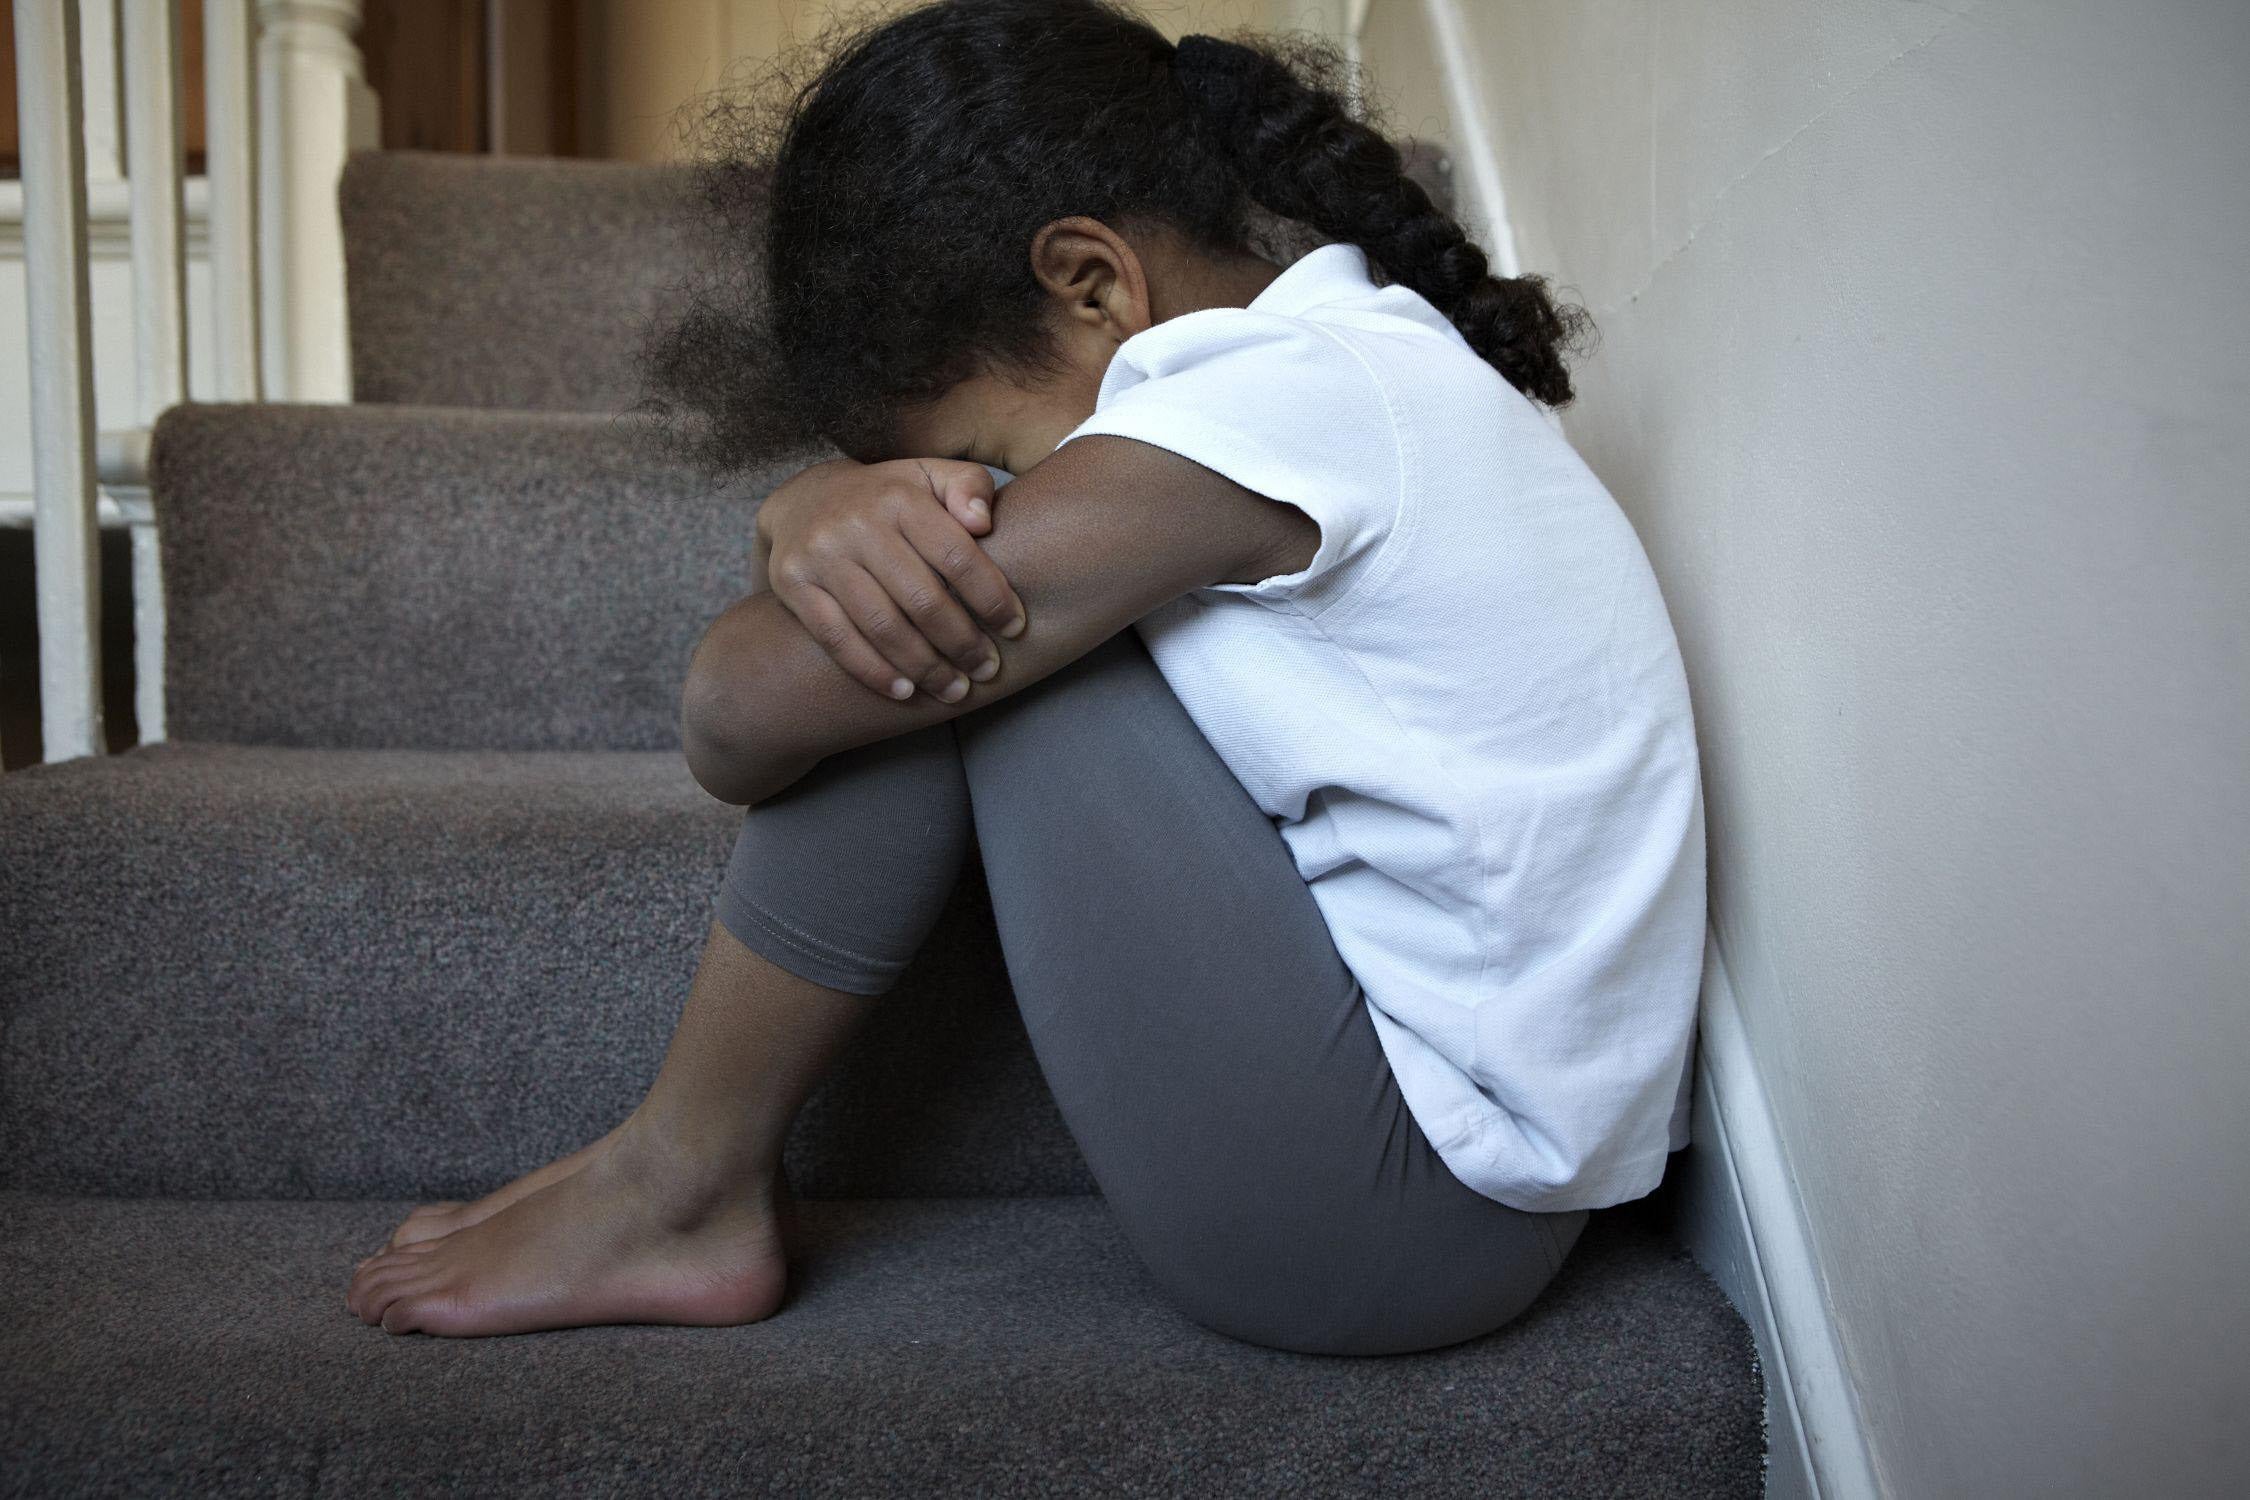 Research by the NSPCC suggests that physical punishment of children is associated with increased aggression and antisocial behaviour